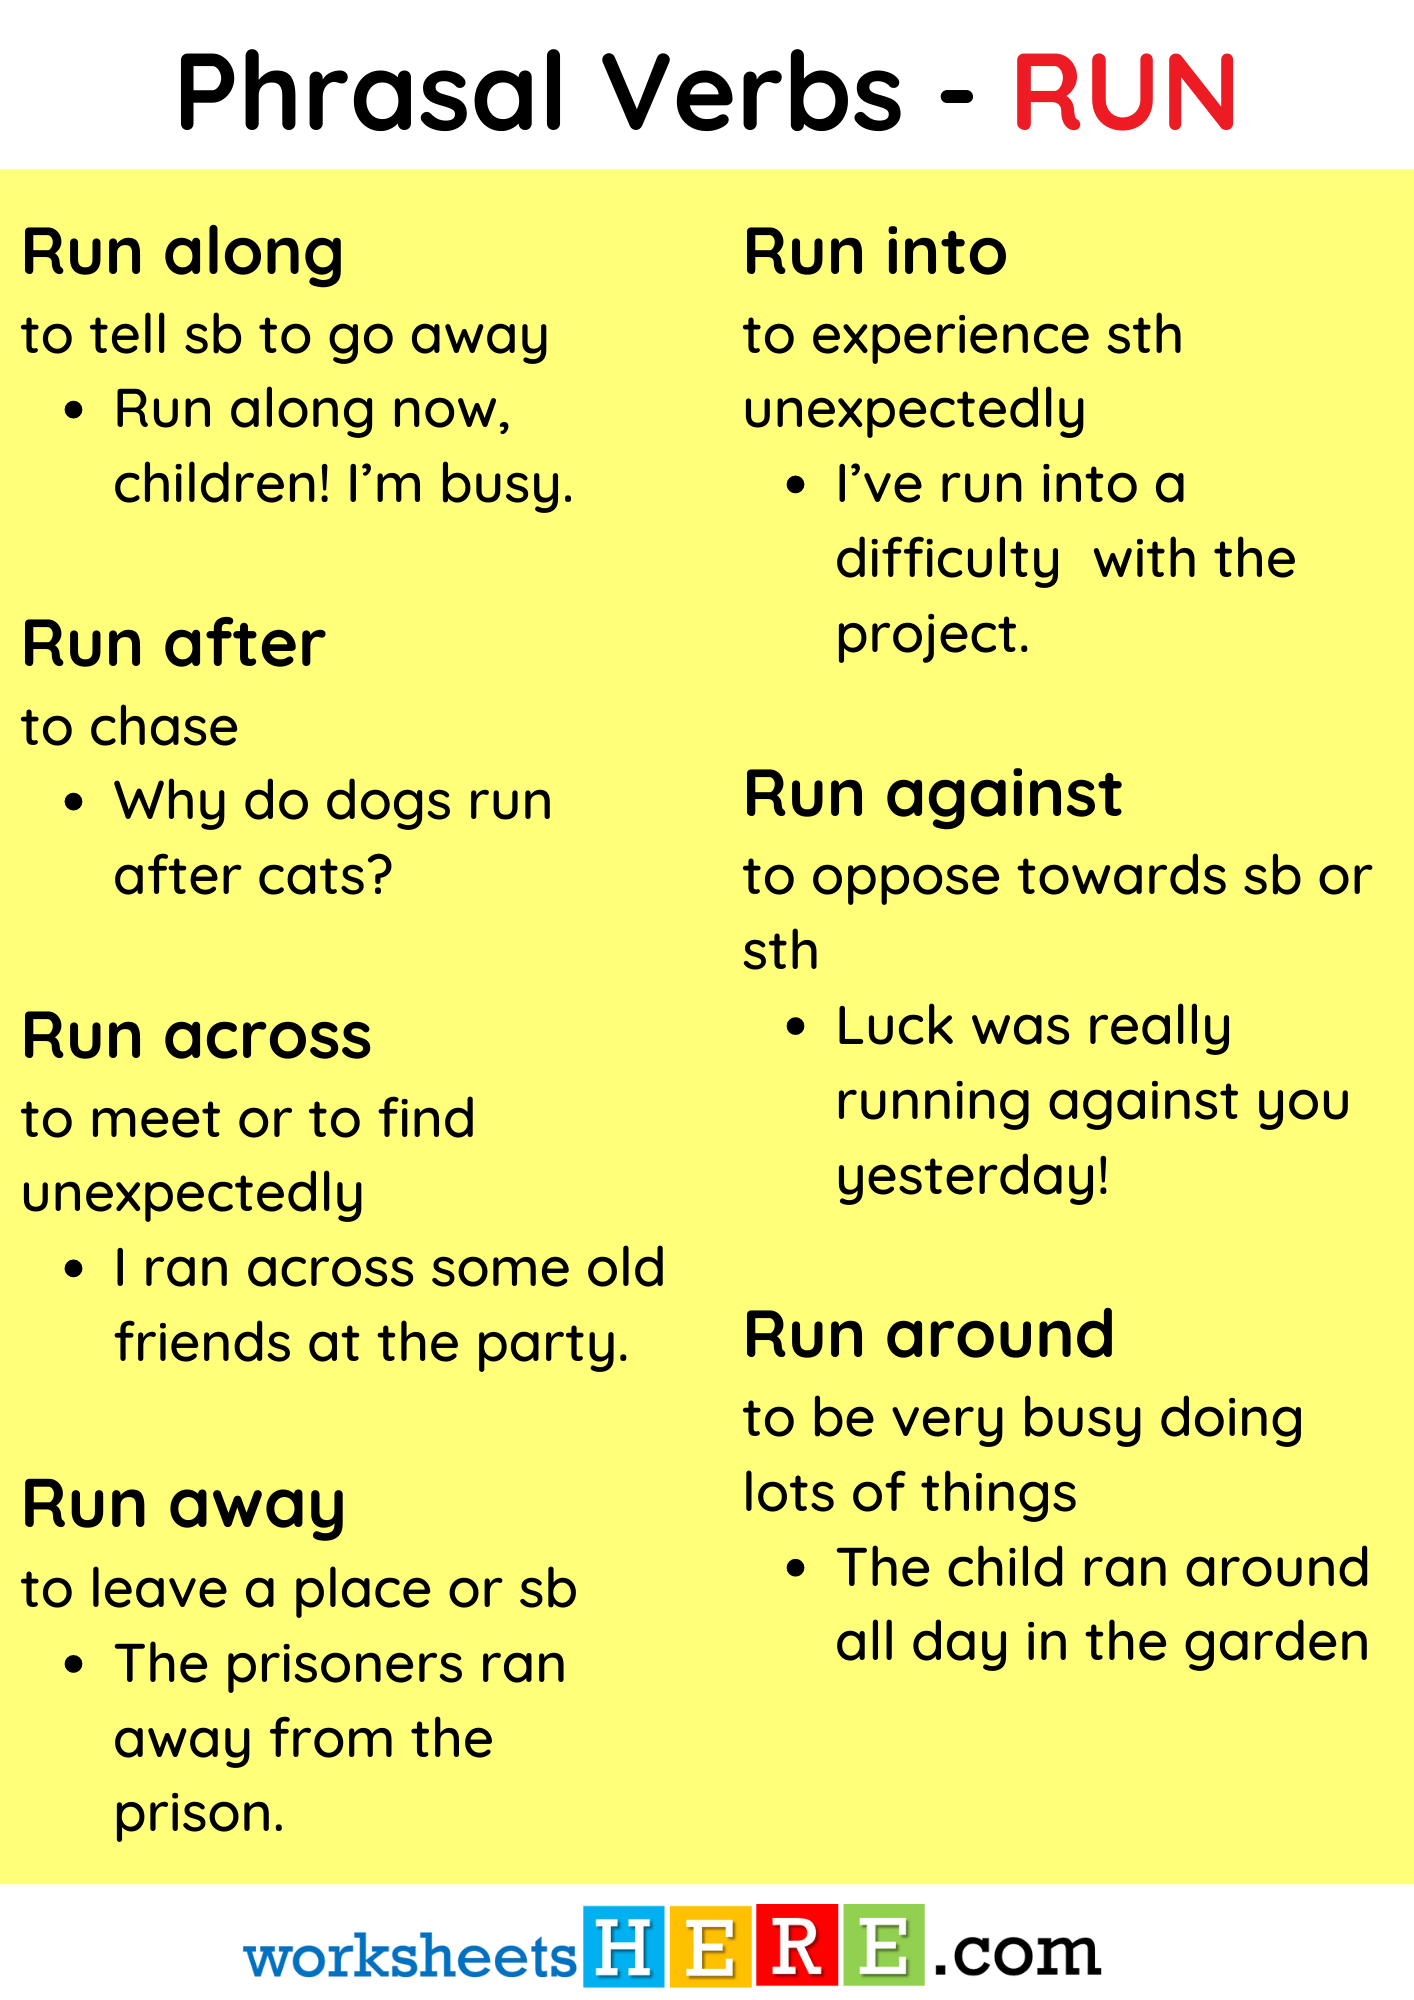 Phrasal Verbs with RUN Definition and Example Sentences PDF Worksheet